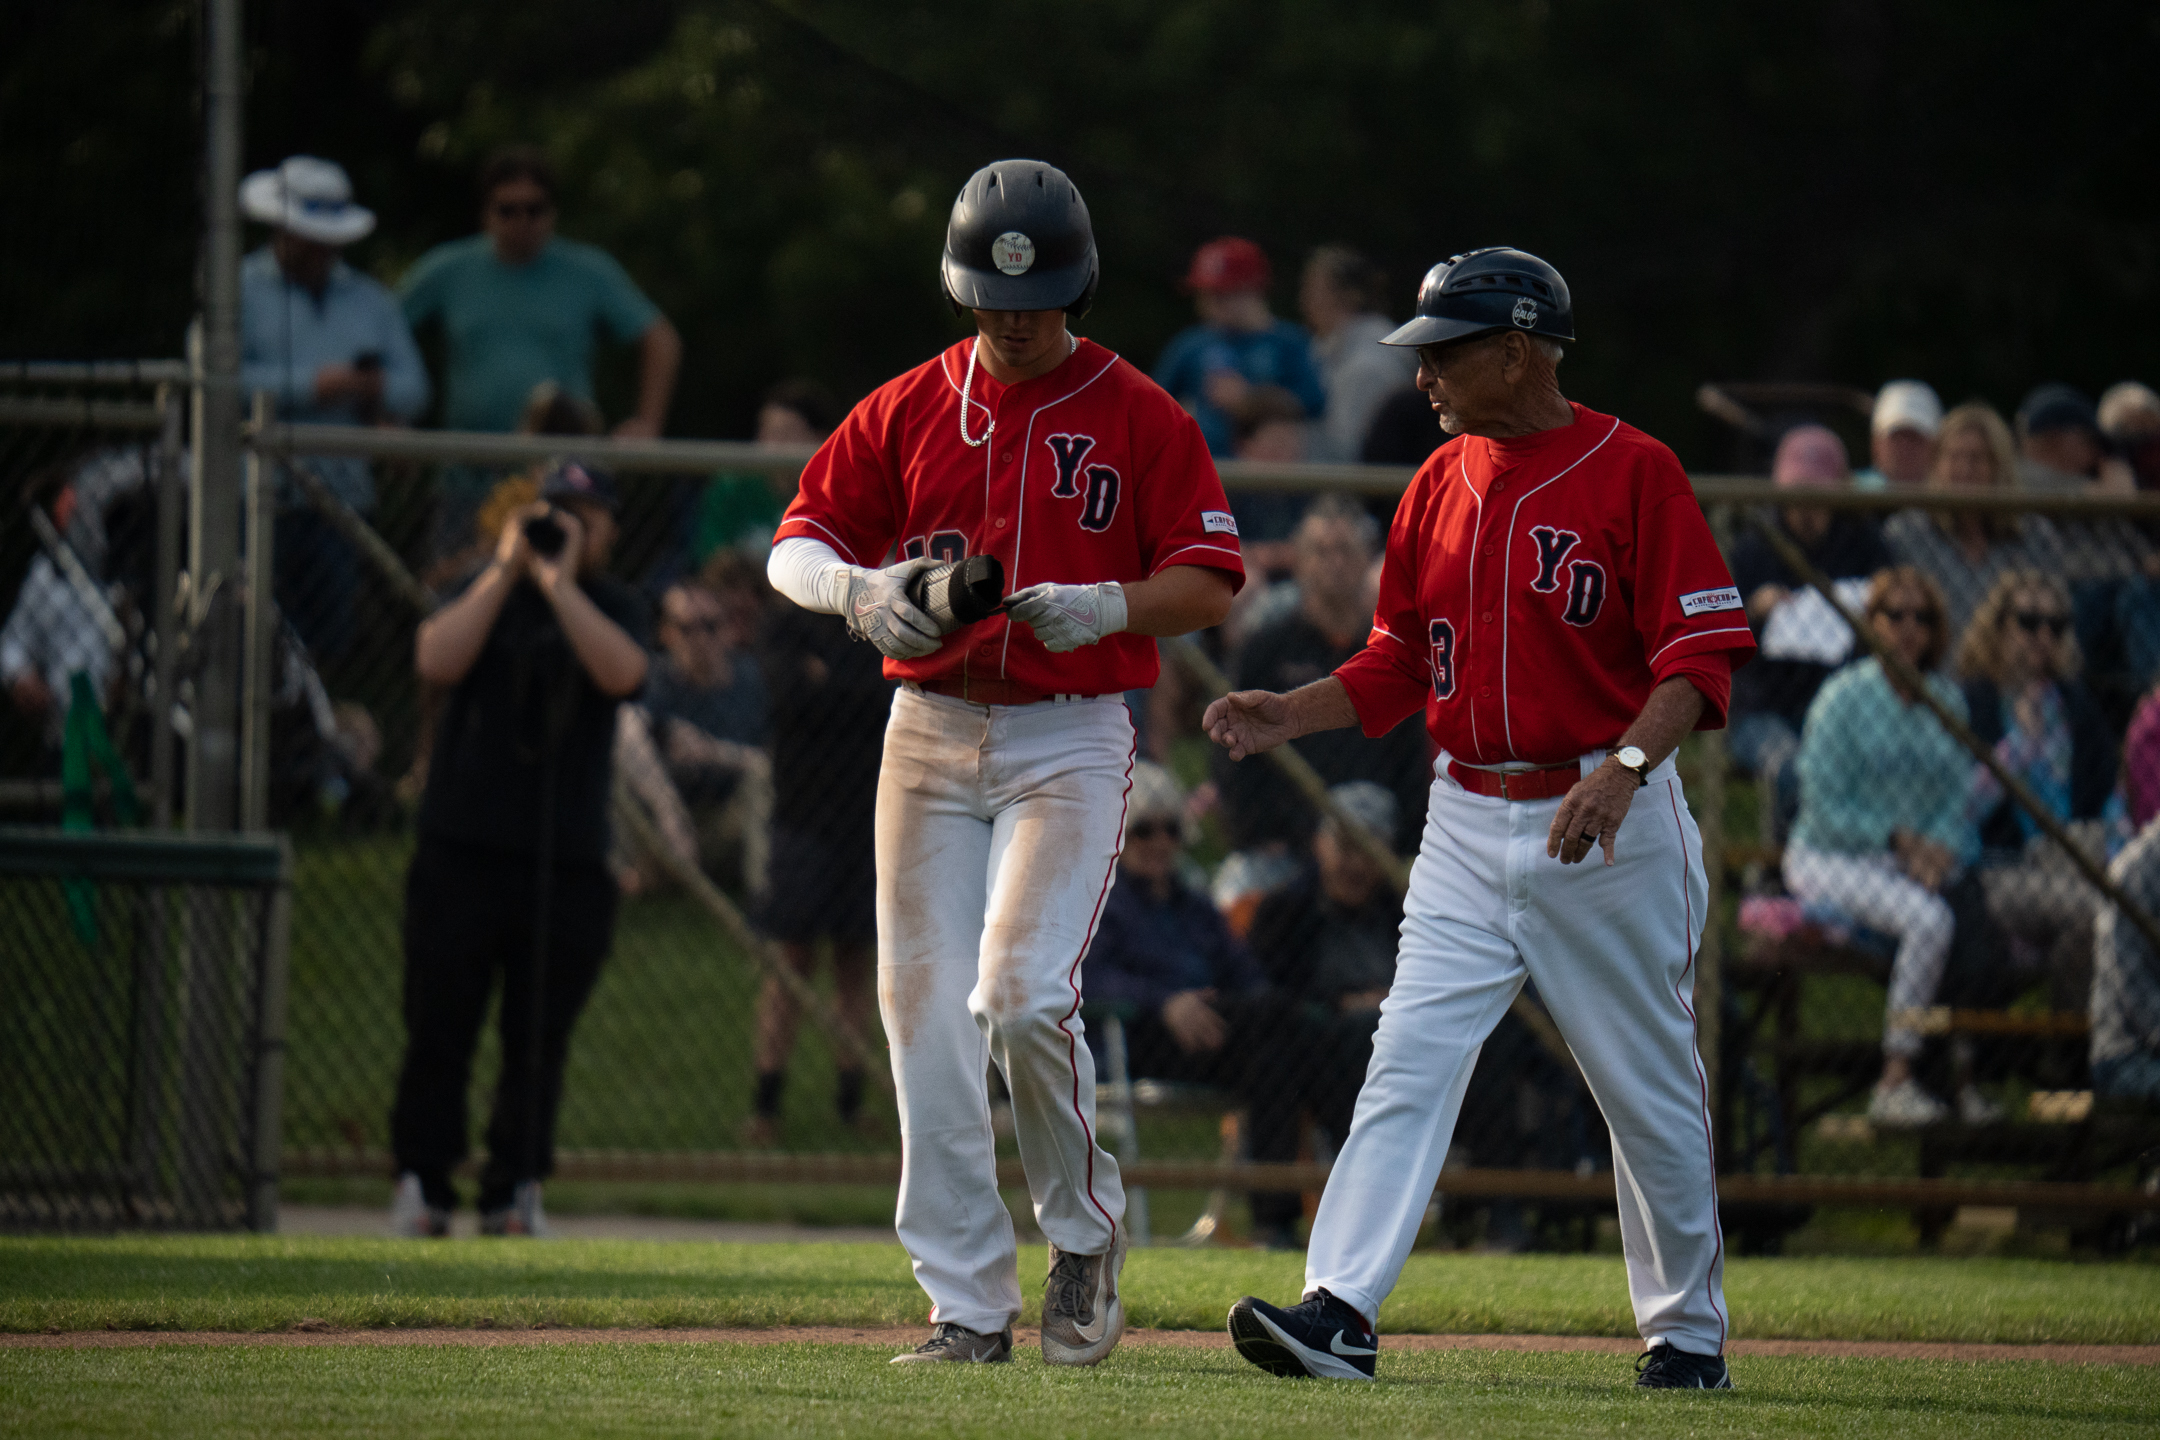 Errors Plague Y-D in Their Season-Opener Loss to Harwich - YARMOUTH